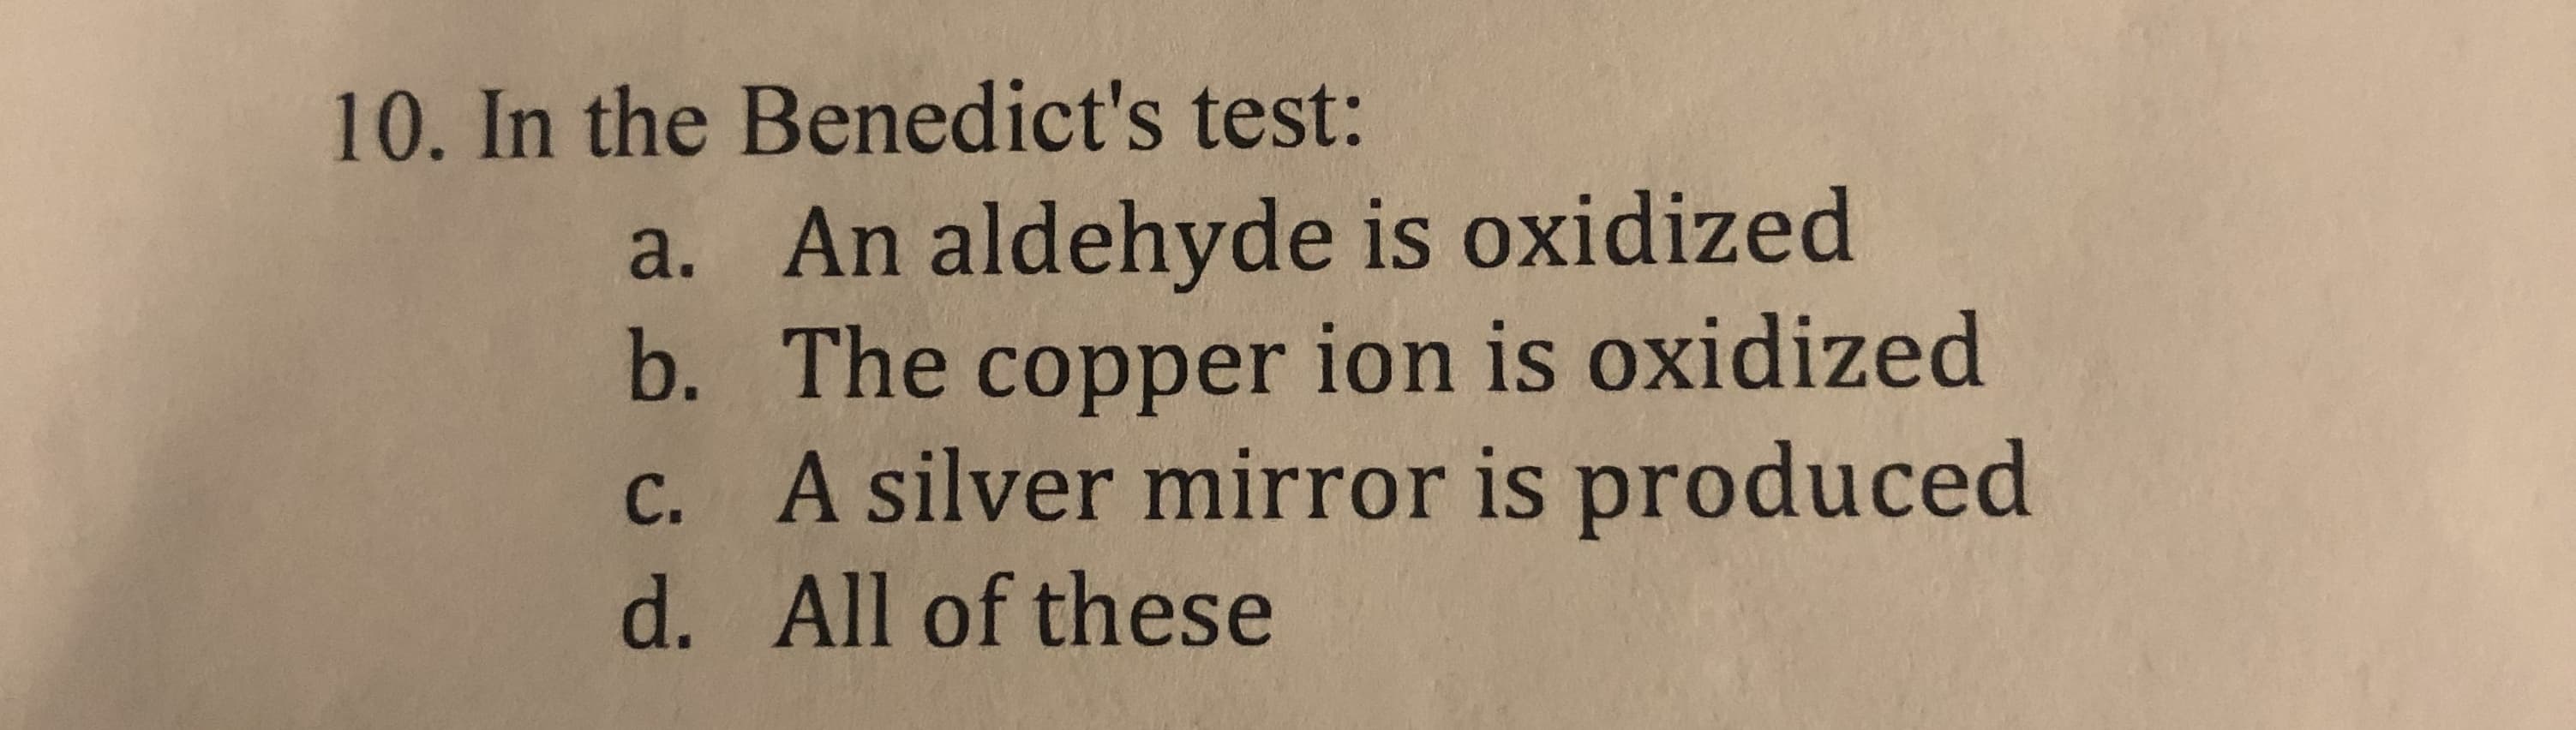 10. In the Benedict's test:
a. An aldehyde is oxidized
b. The copper ion is oxidized
c. A silver mirror is produced
d. All of these
